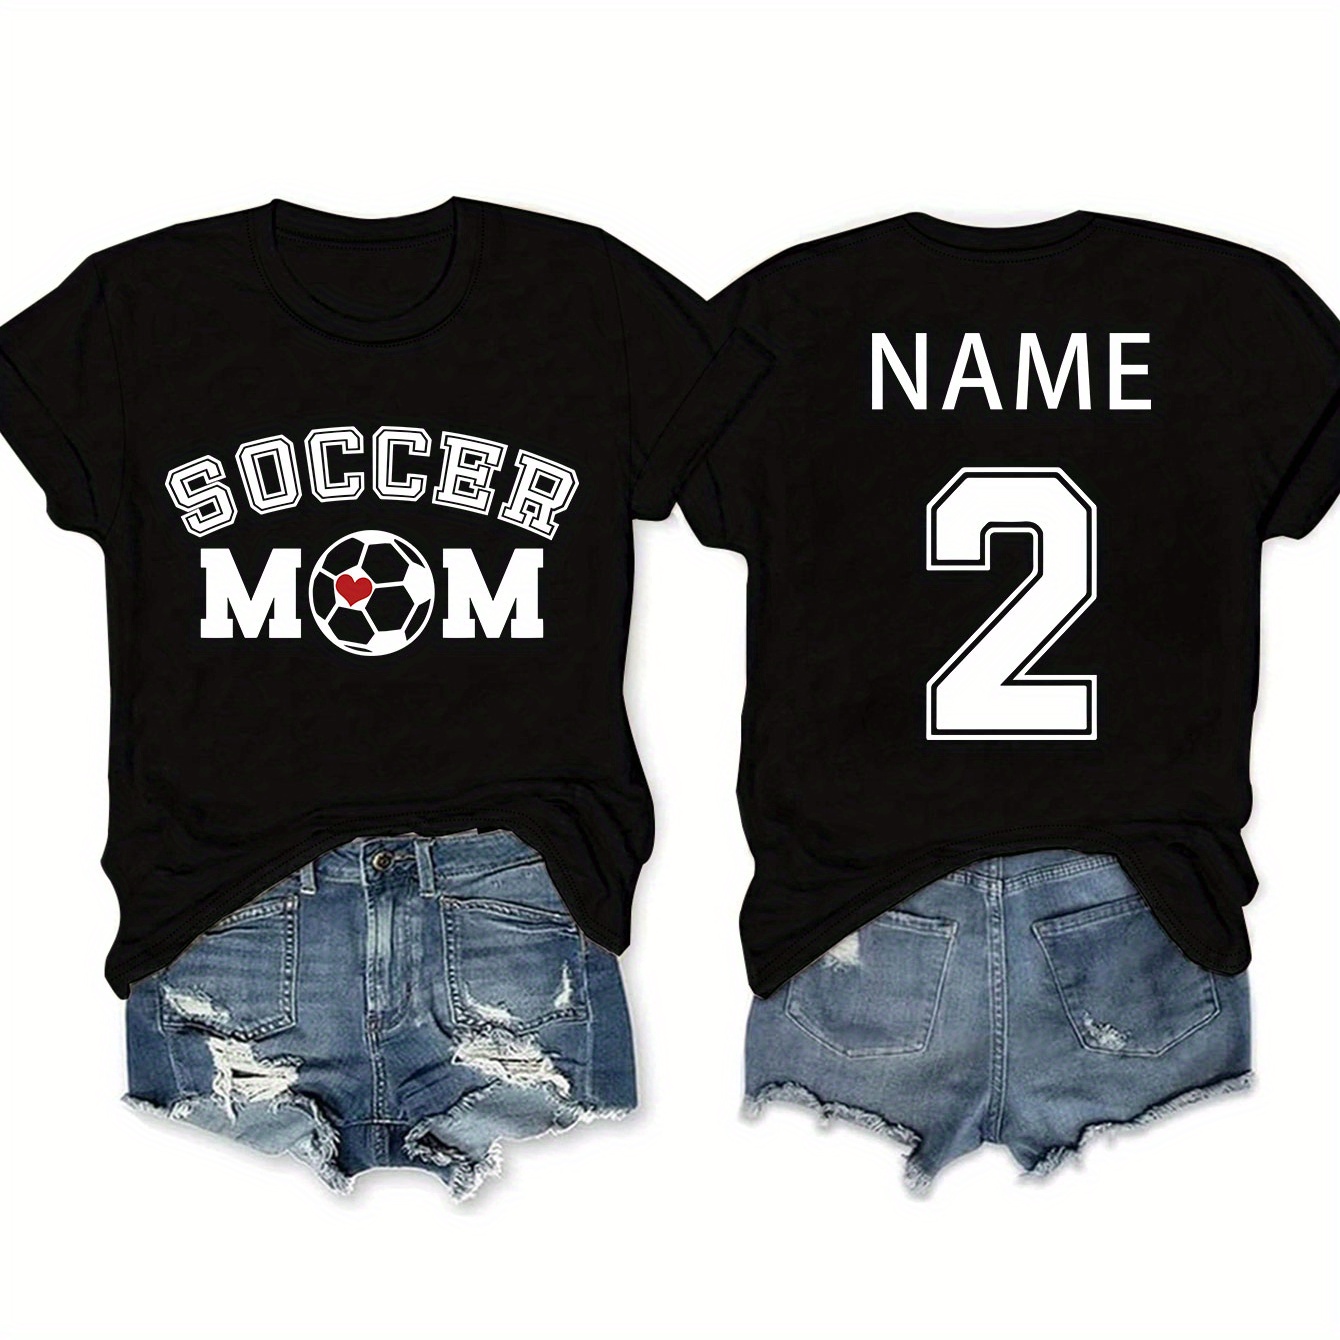 

Soccer Mom Print Crew Neck T-shirt, Casual Customized With Name & Number On The Back Short Sleeve T-shirt For Spring & Summer, Women's Clothing